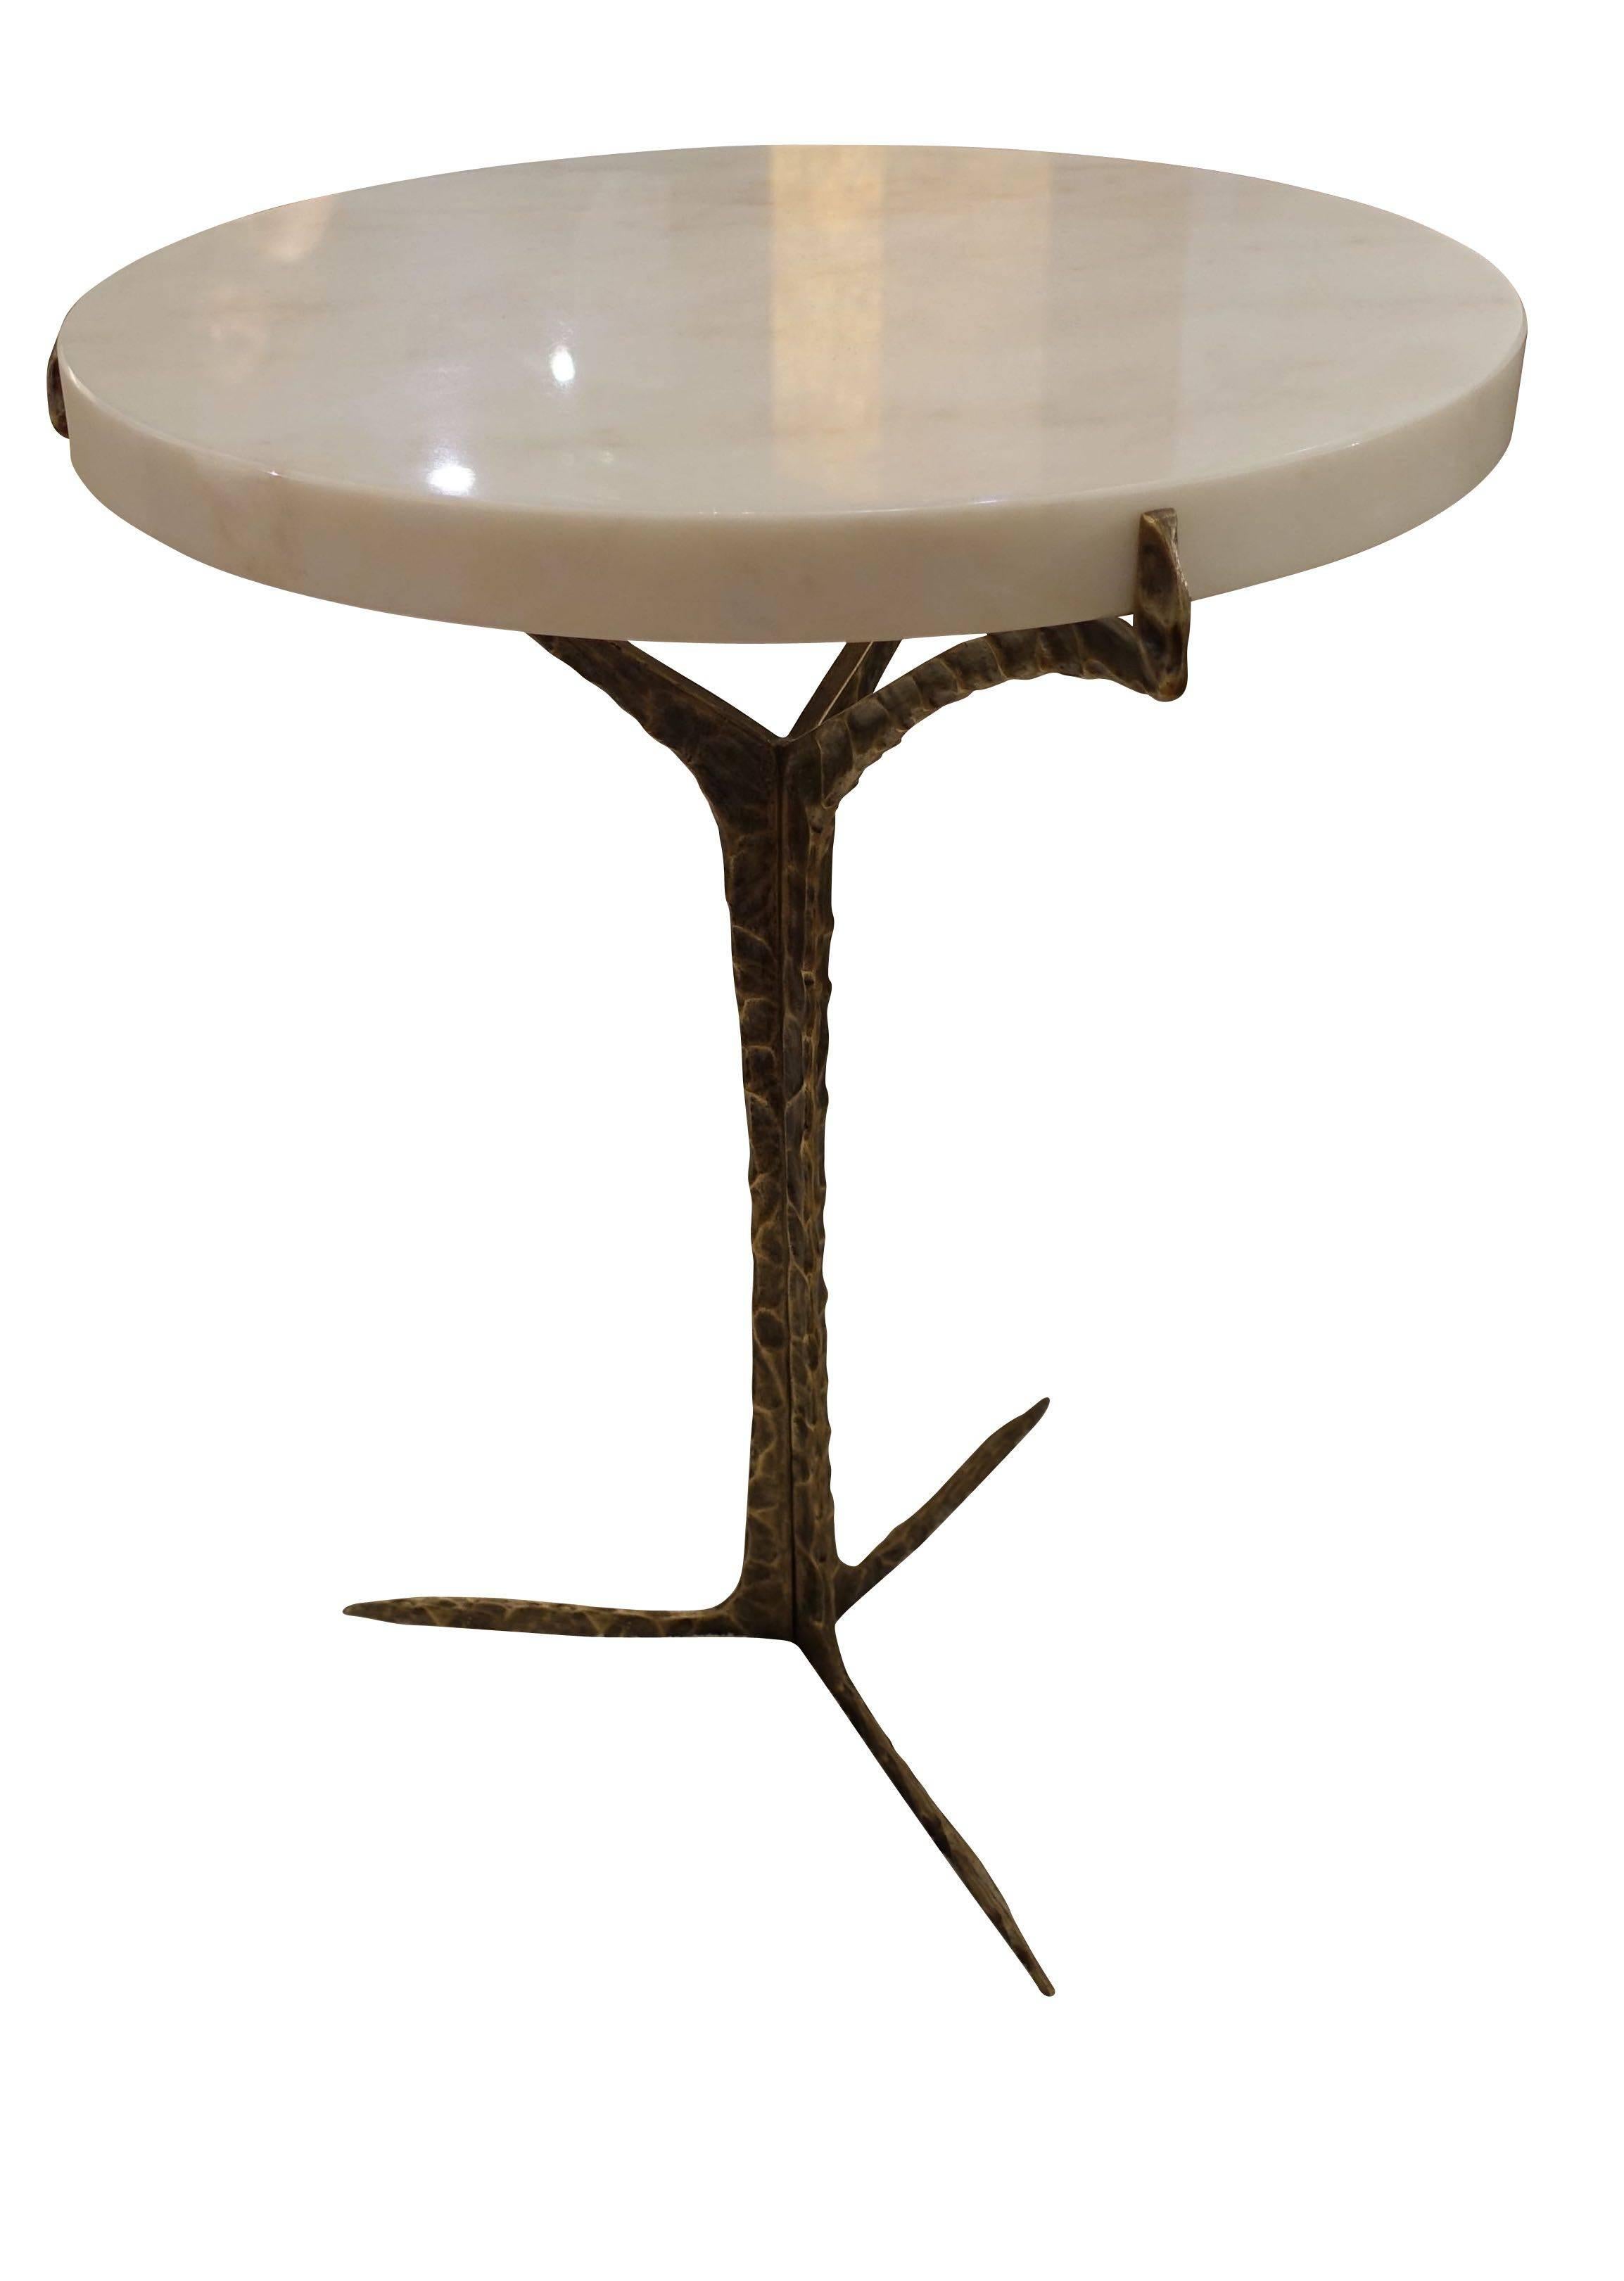 Contemporary Portuguese cocktail table.
Round Estremoz marble-top, hammered aged brass feet.
 